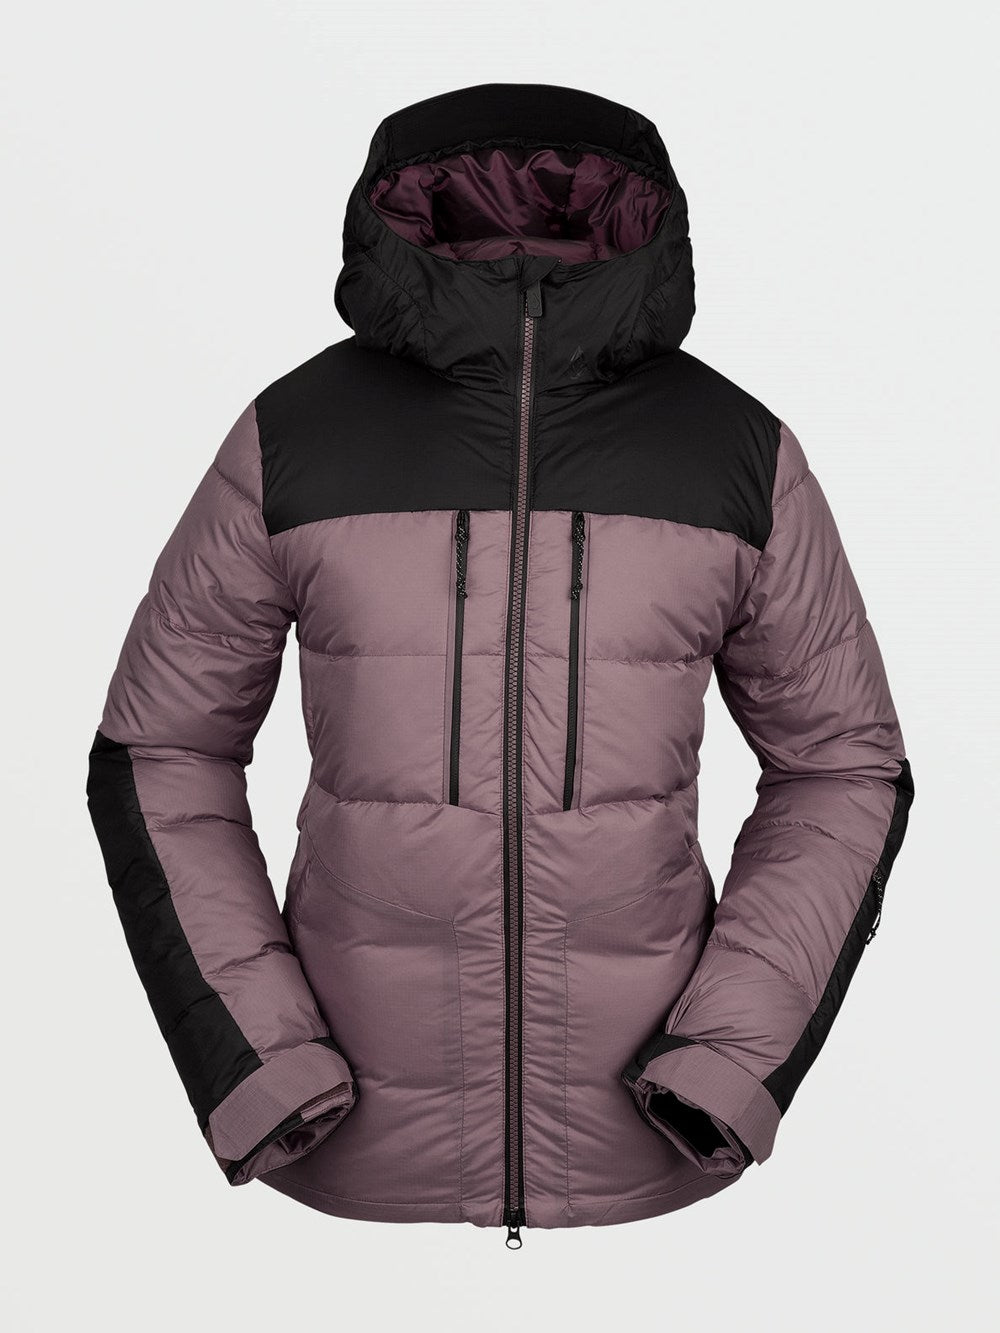 Chaqueta de snowboard Mujer Volcom Lifted Down Jacket - Rosewood